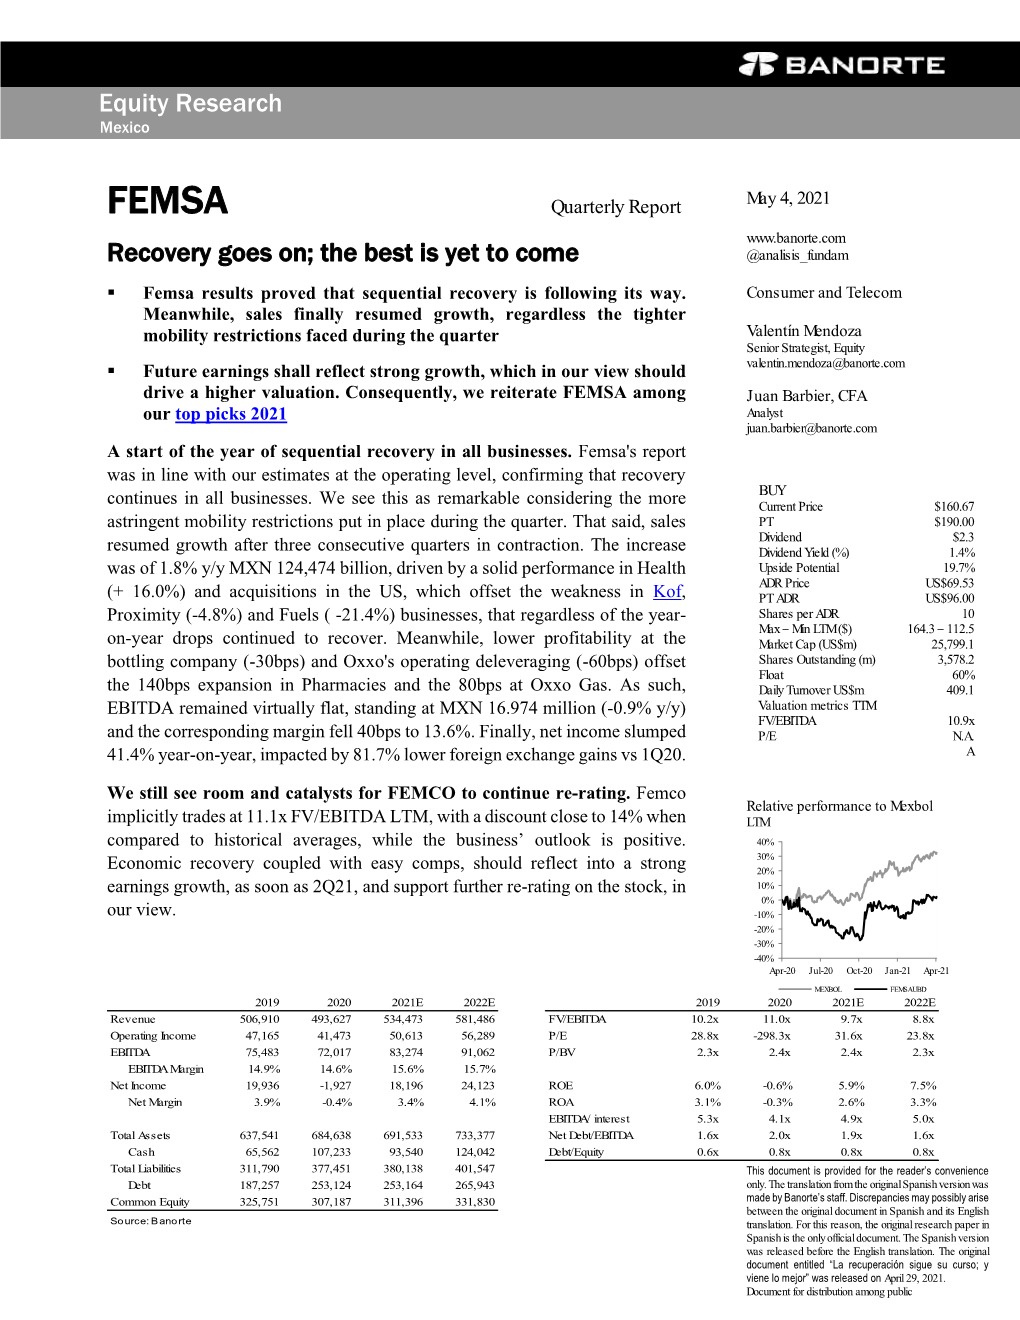 FEMSA Recovery Goes On; the Best Is Yet to Come @Analisis Fundam